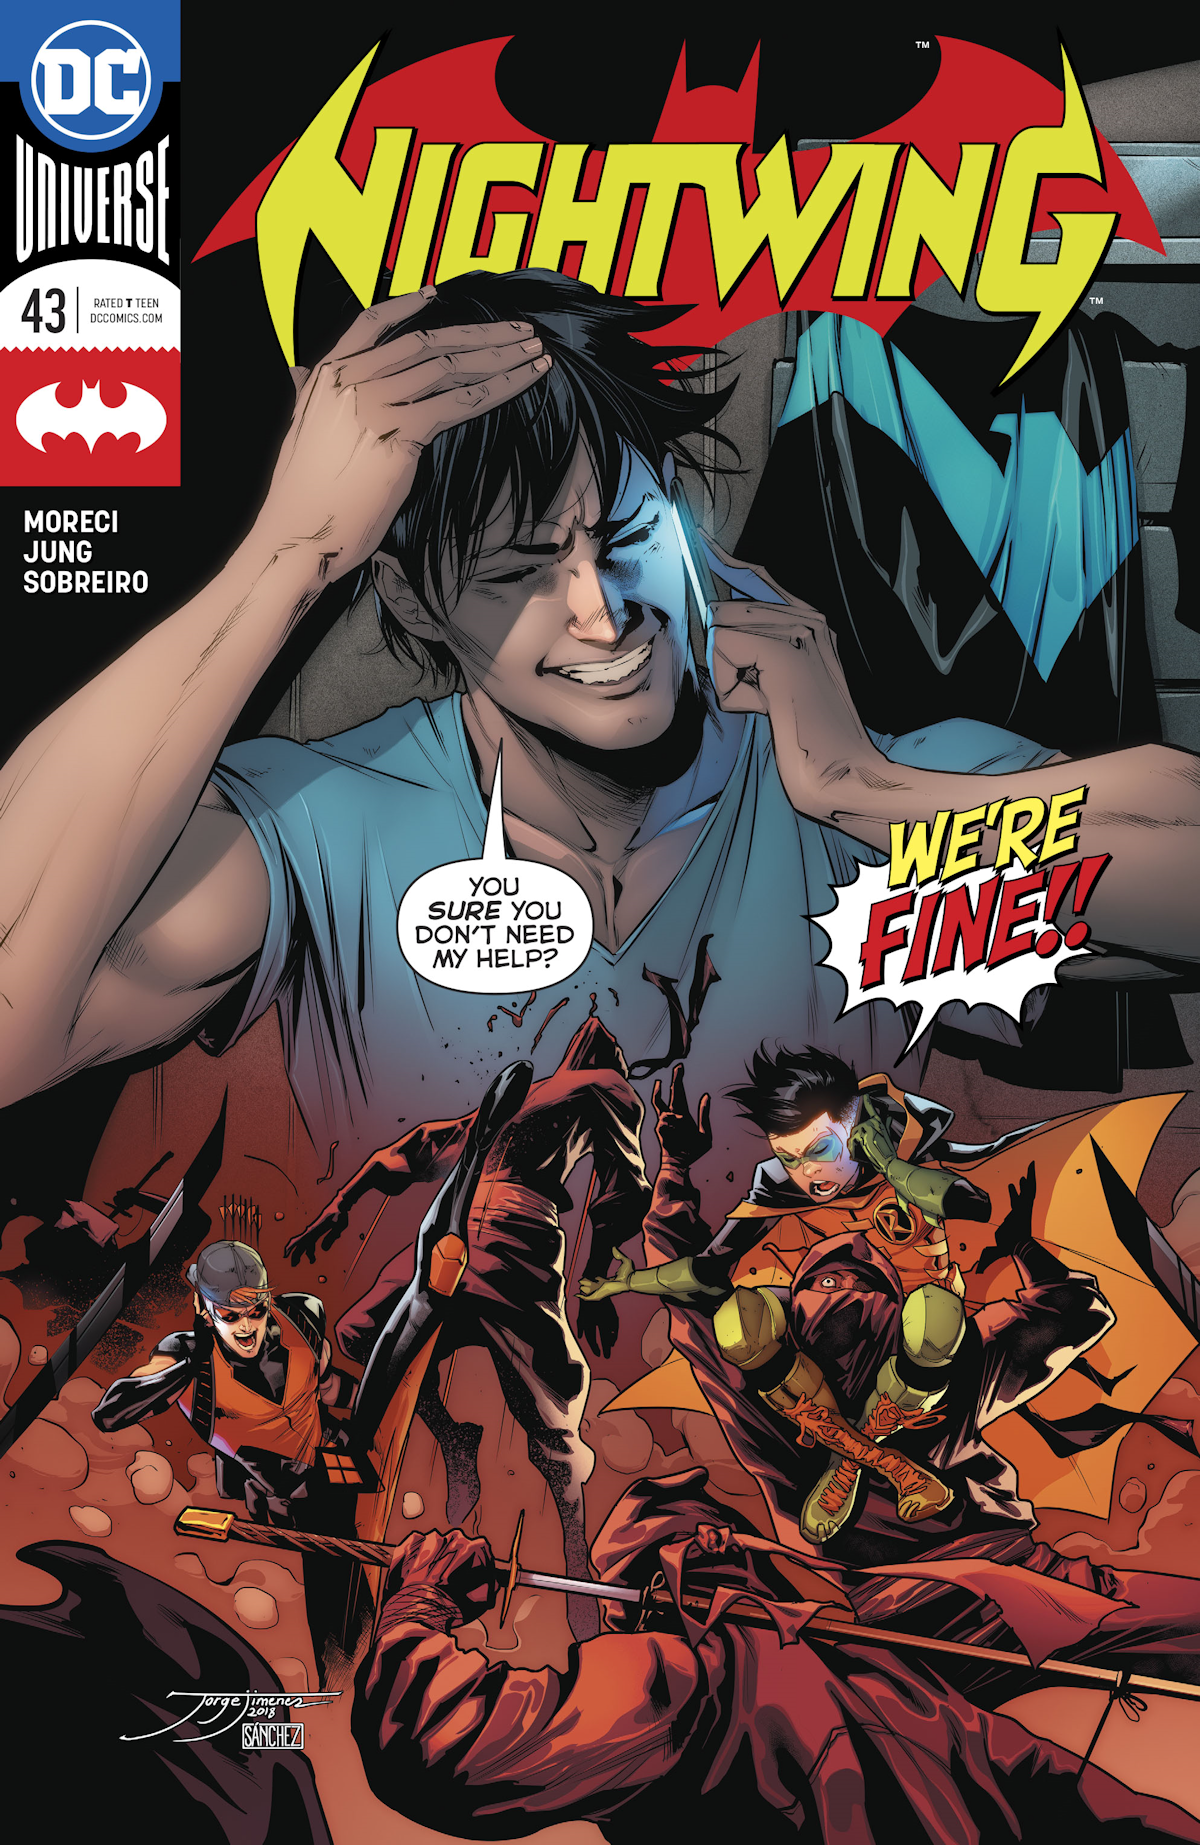 Nightwing Vol. 4 43 (Cover A)